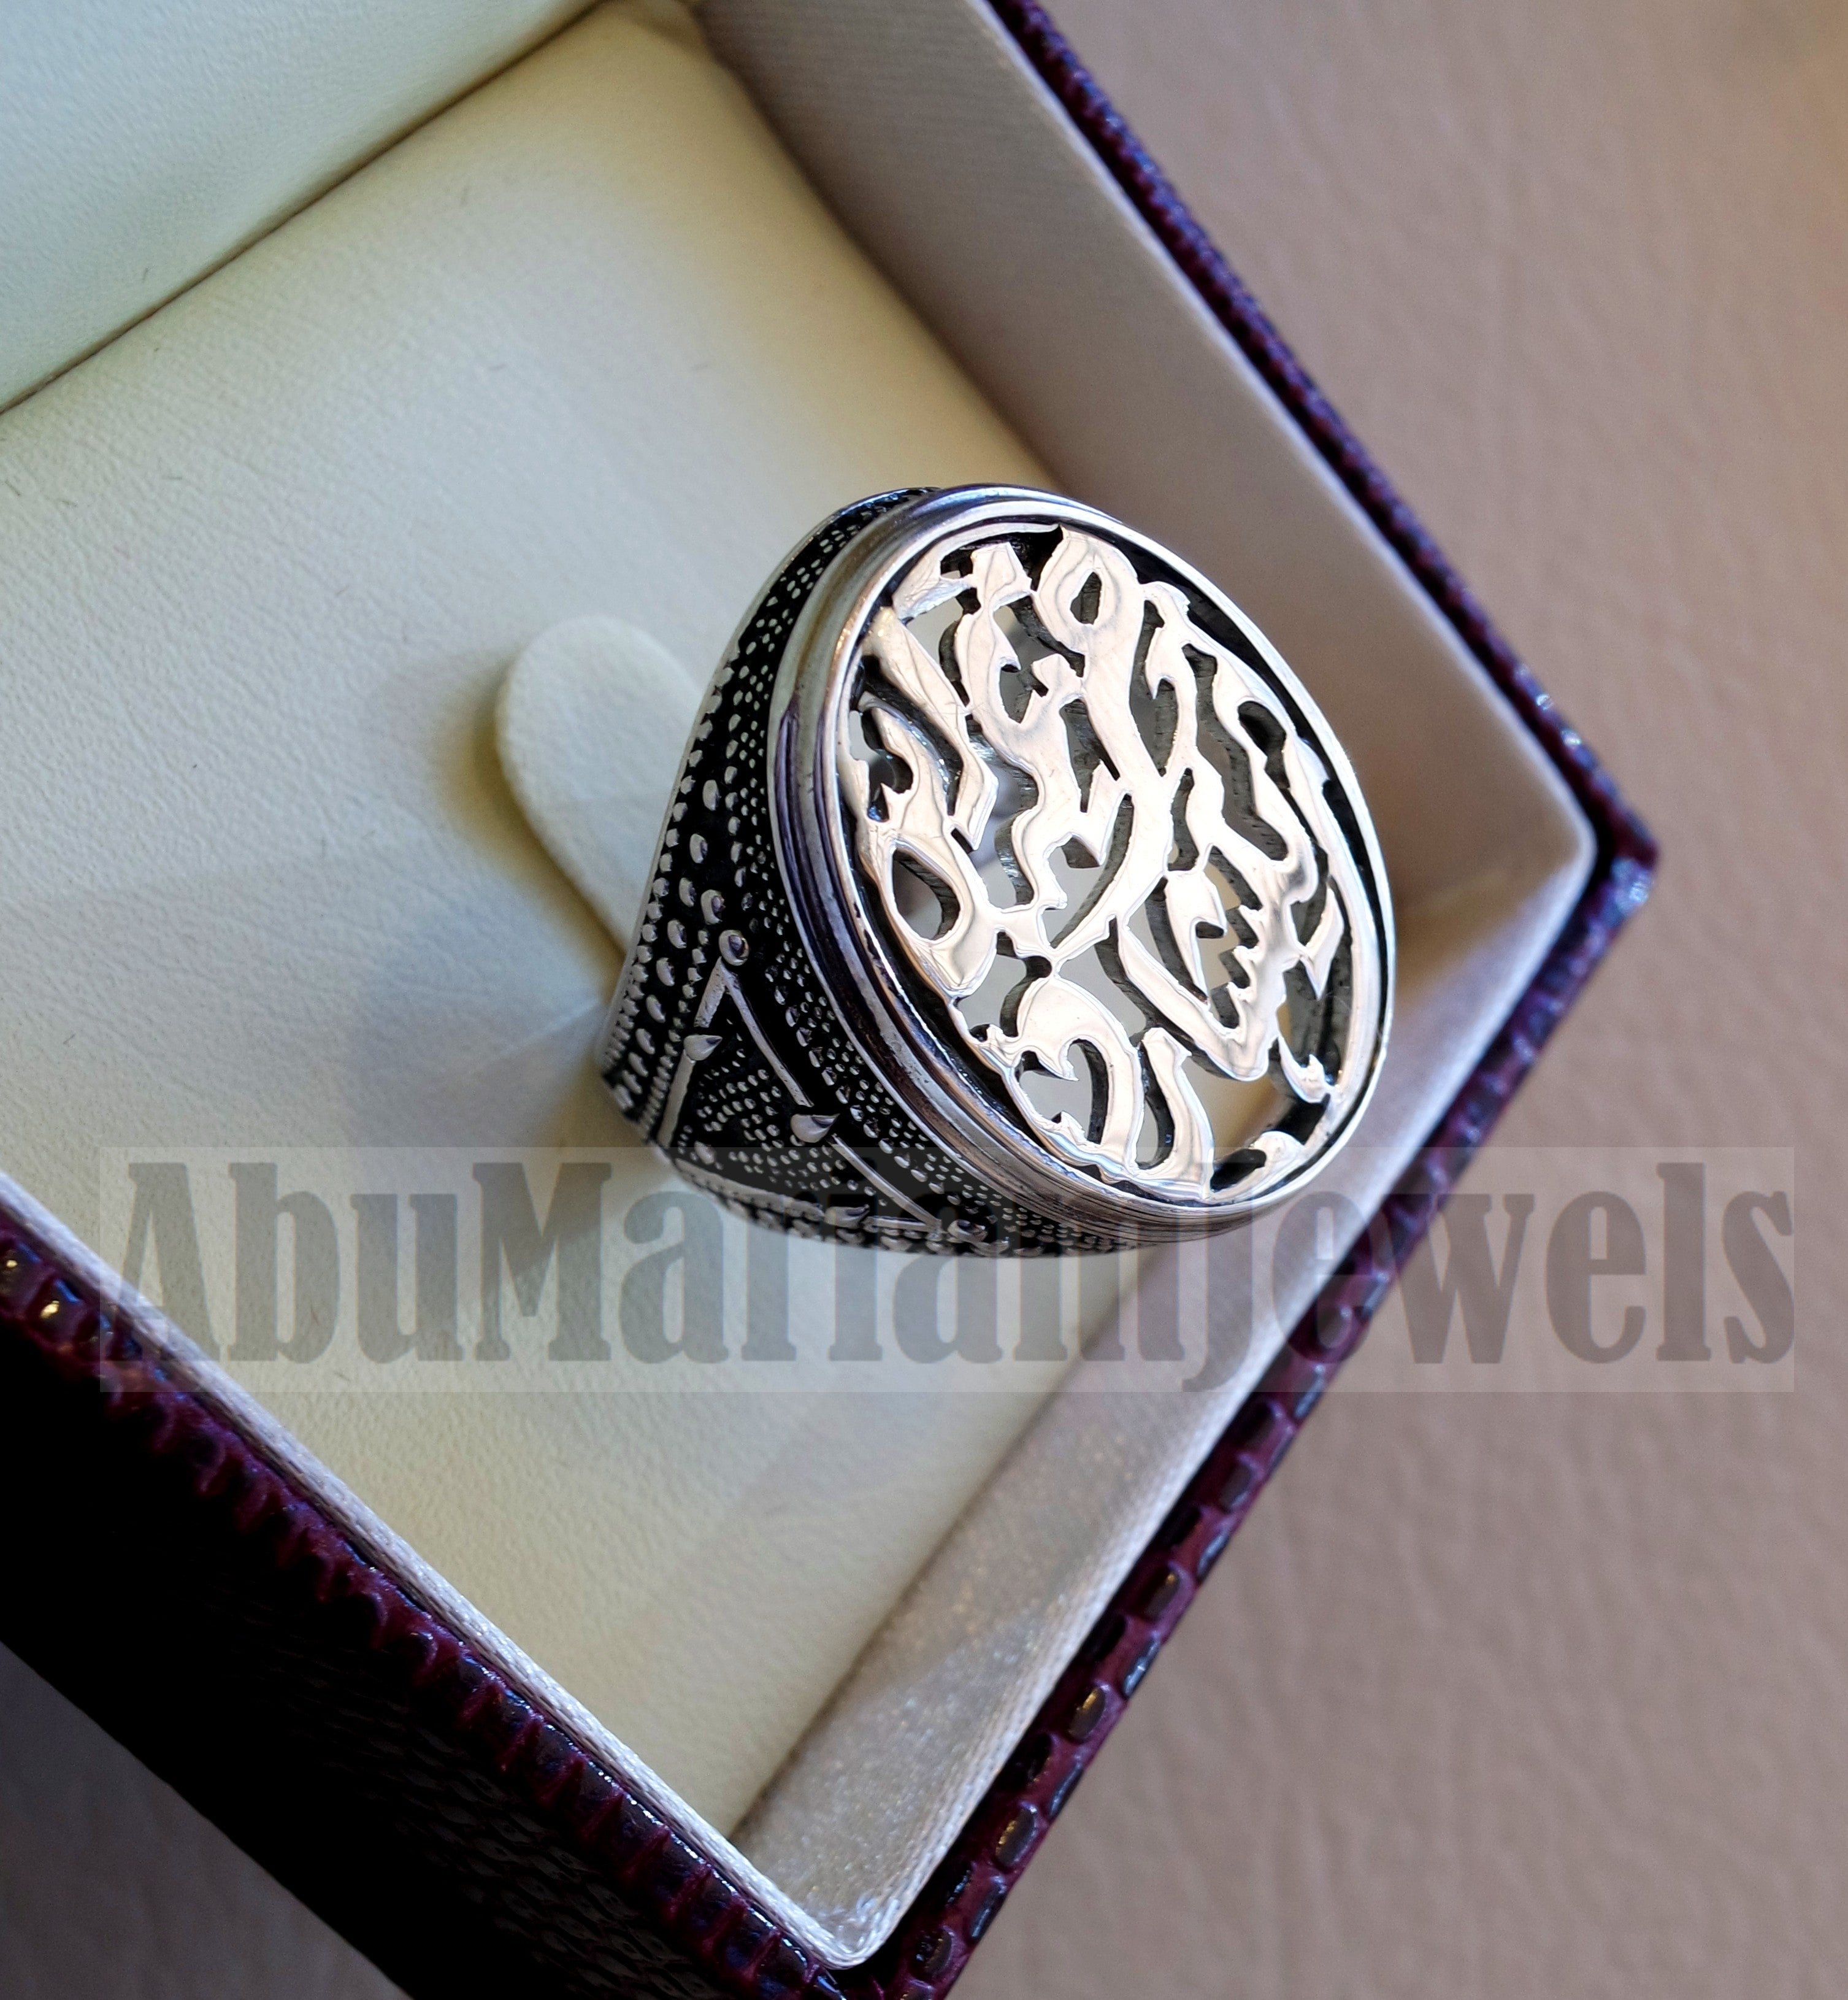 Customized Arabic calligraphy names handmade ring personalized antique jewelry style sterling silver 925 any size TSN1015 خاتم اسم تفصيل